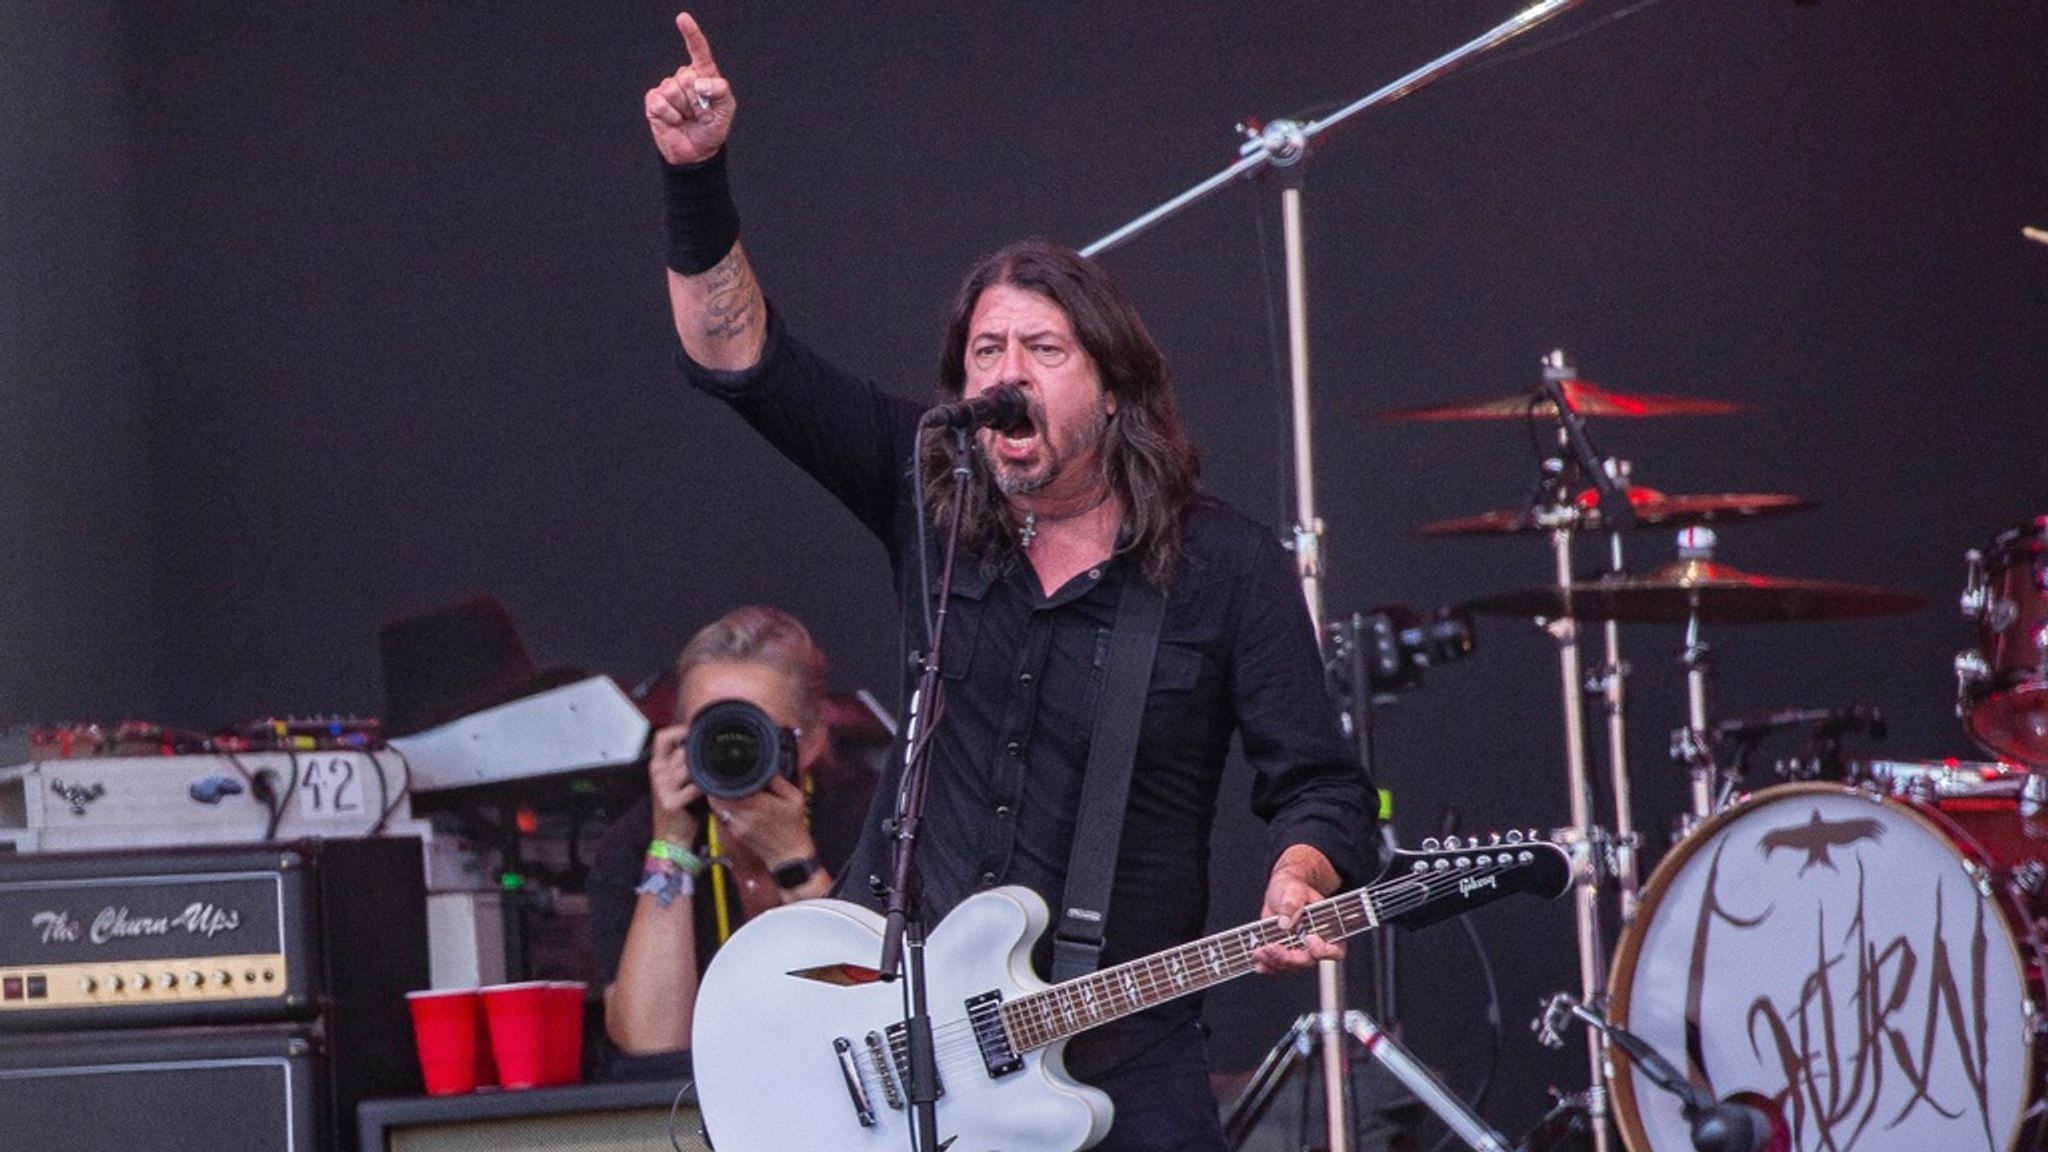 Glastonbury Foo Fighters will be a hard act to beat after their